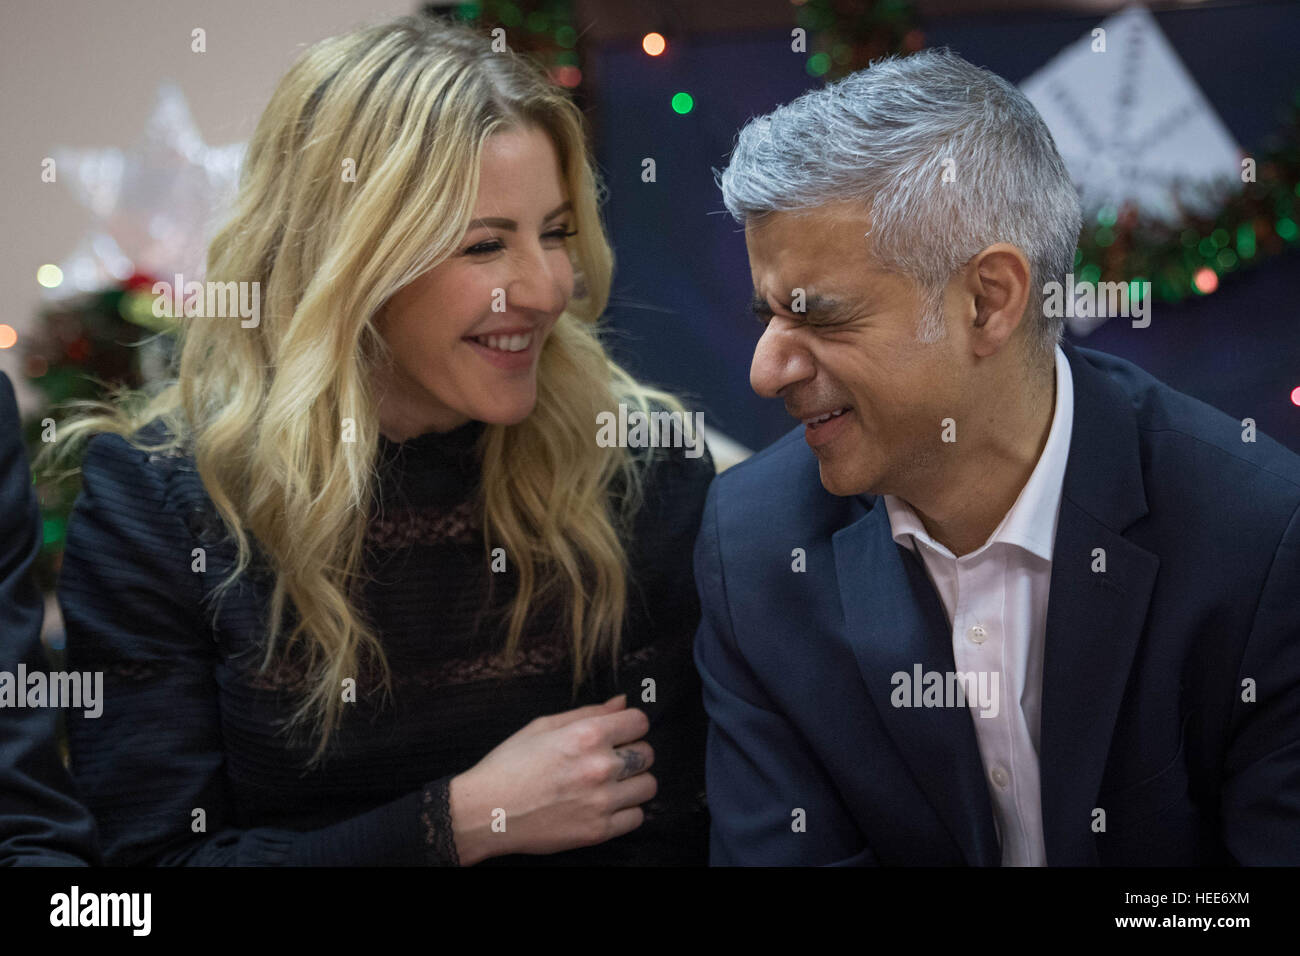 Mayor of London Sadiq Khan and singer Ellie Goulding meet users of the Marylebone Centre in London, which provides accommodation, training and skills support for homeless women. Stock Photo